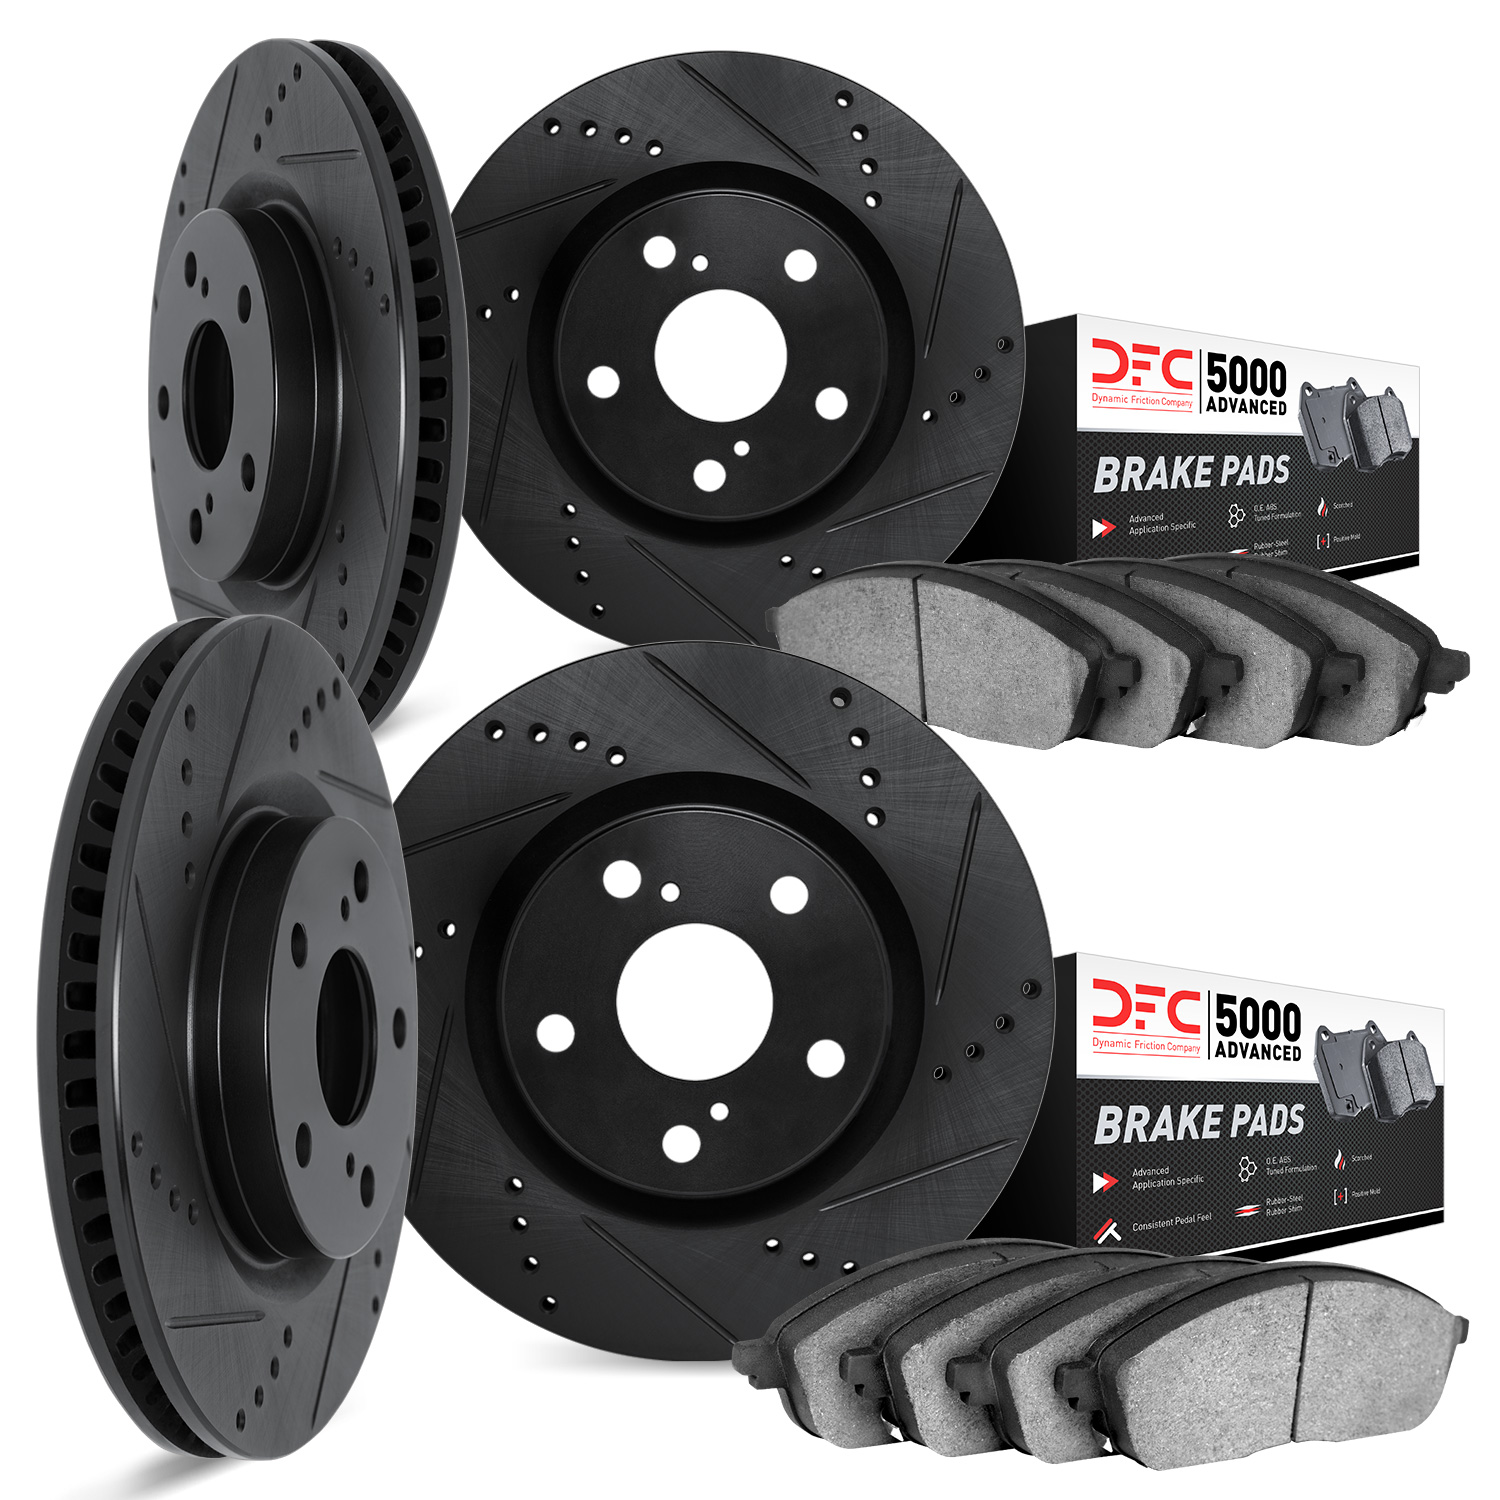 8504-75021 Drilled/Slotted Brake Rotors w/5000 Advanced Brake Pads Kit [Black], 2007-2017 Lexus/Toyota/Scion, Position: Front an